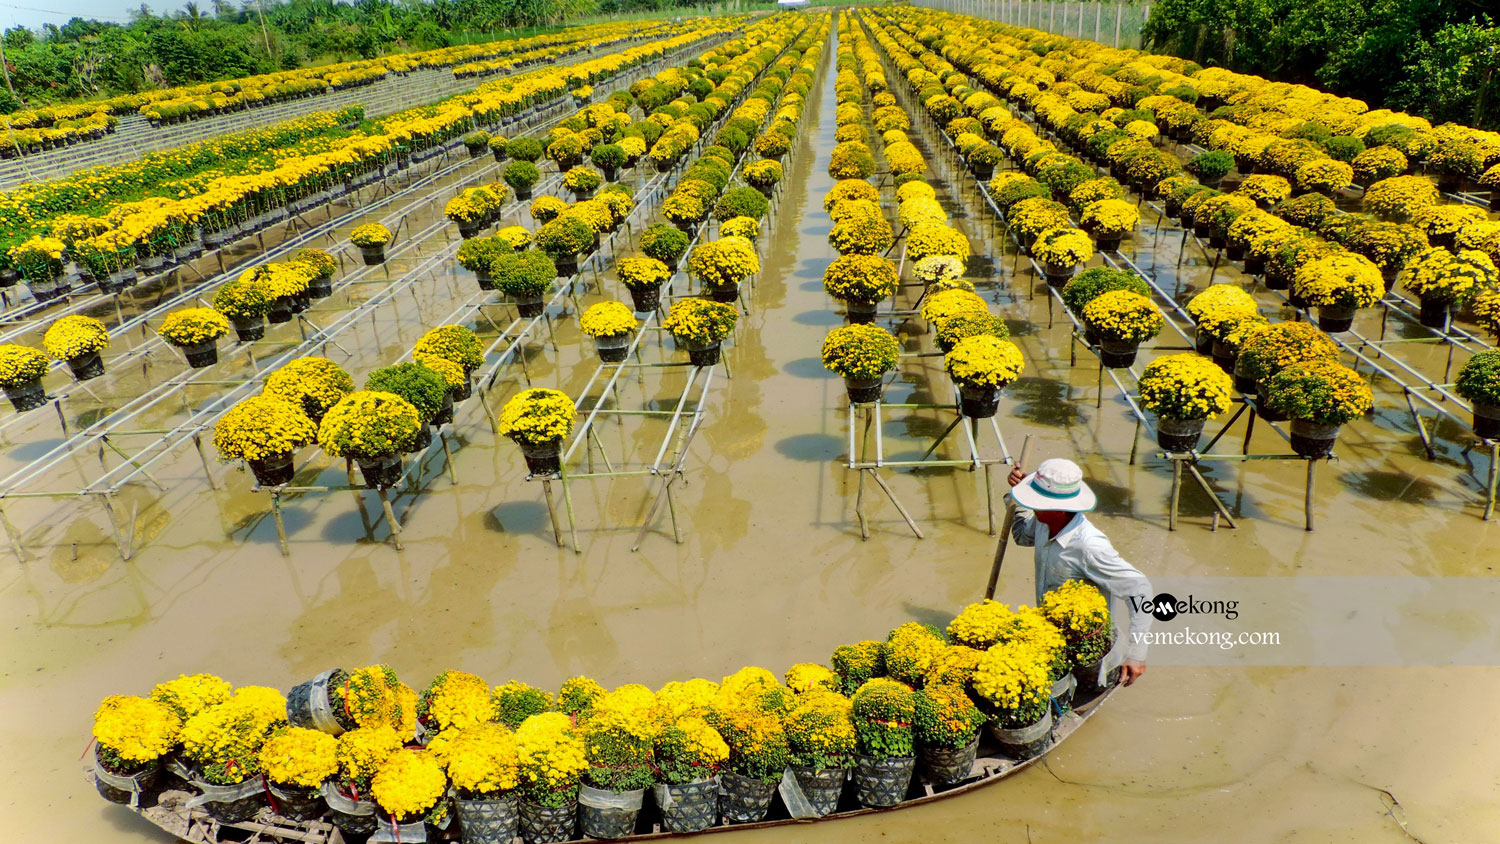 Sa Dec Flower Village – Top Thing to See in Se Dec, An Giang